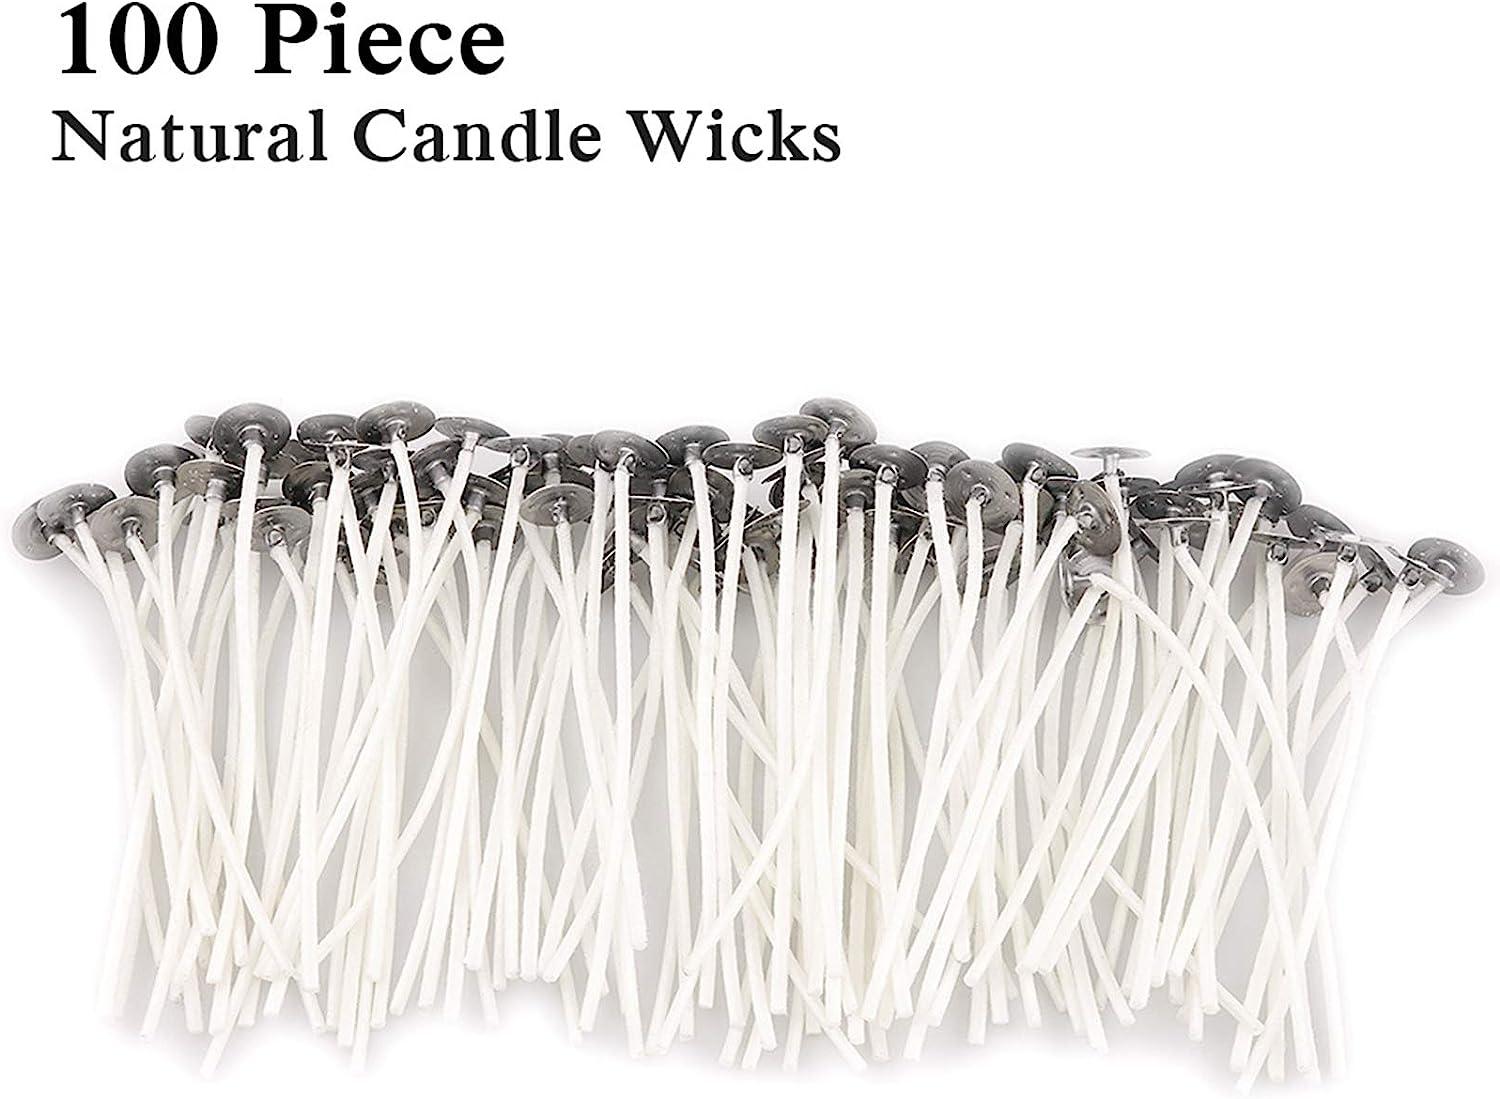 EricX Light 100 Piece Natural Candle Wick Low Smoke 6 Pre-Waxed & 100% Cotton